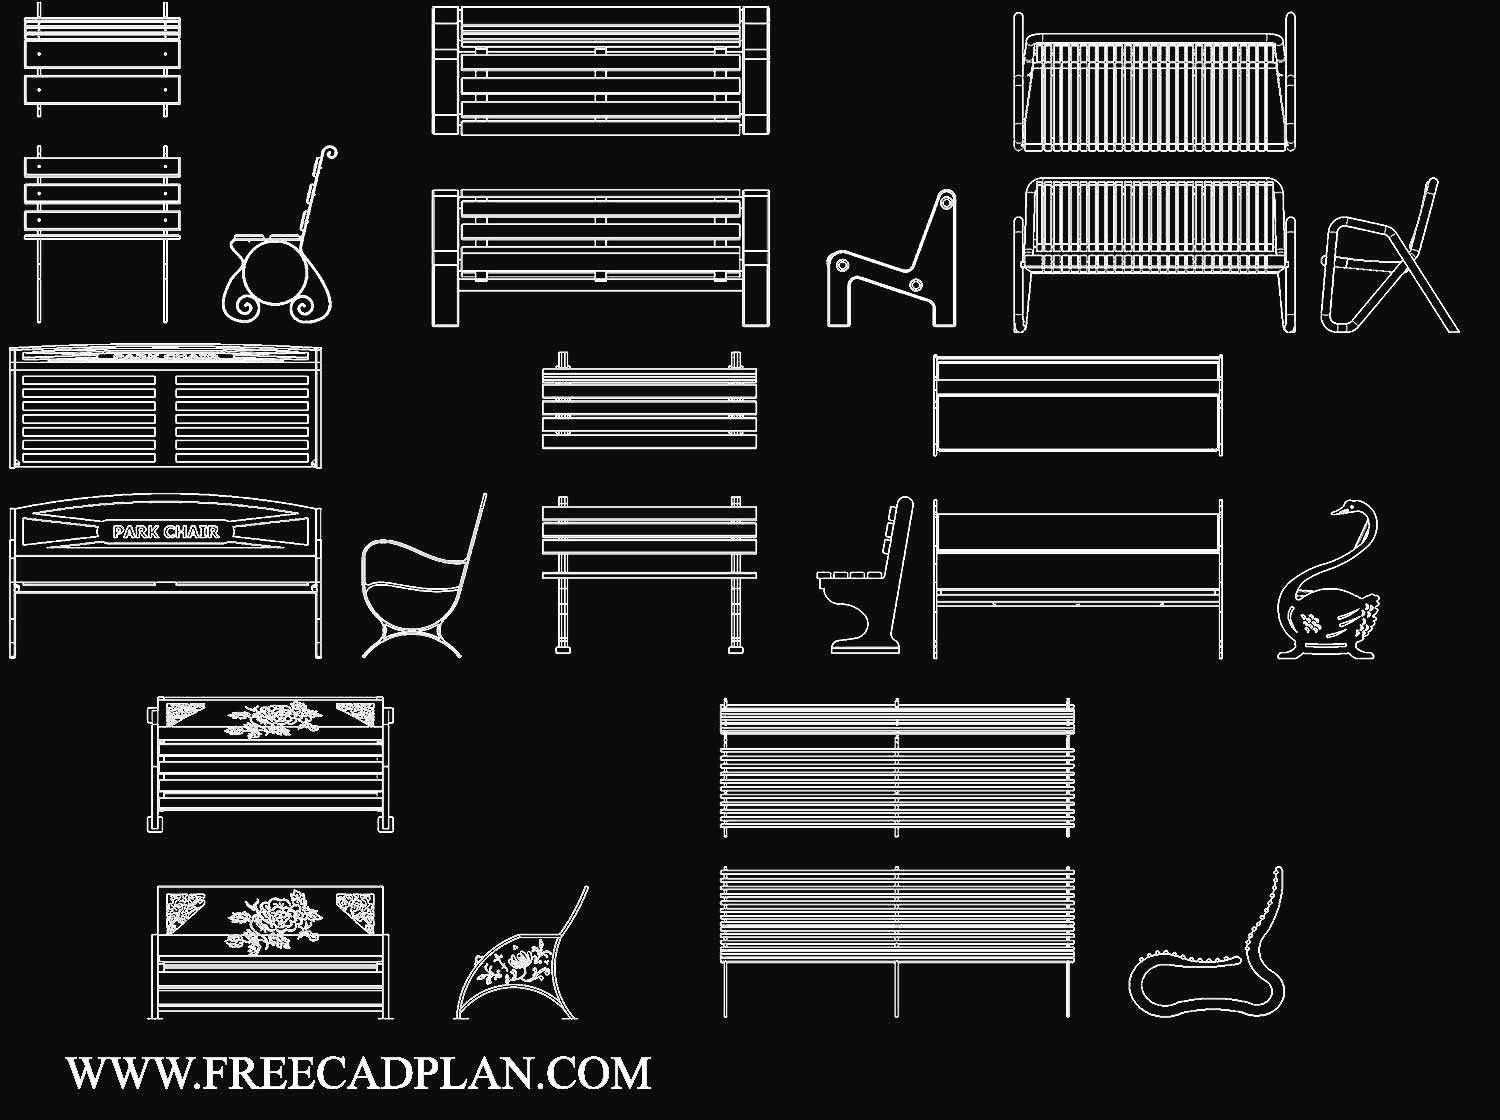 benches-cad-block-in-autocad-dwg-download-free-cad-plan